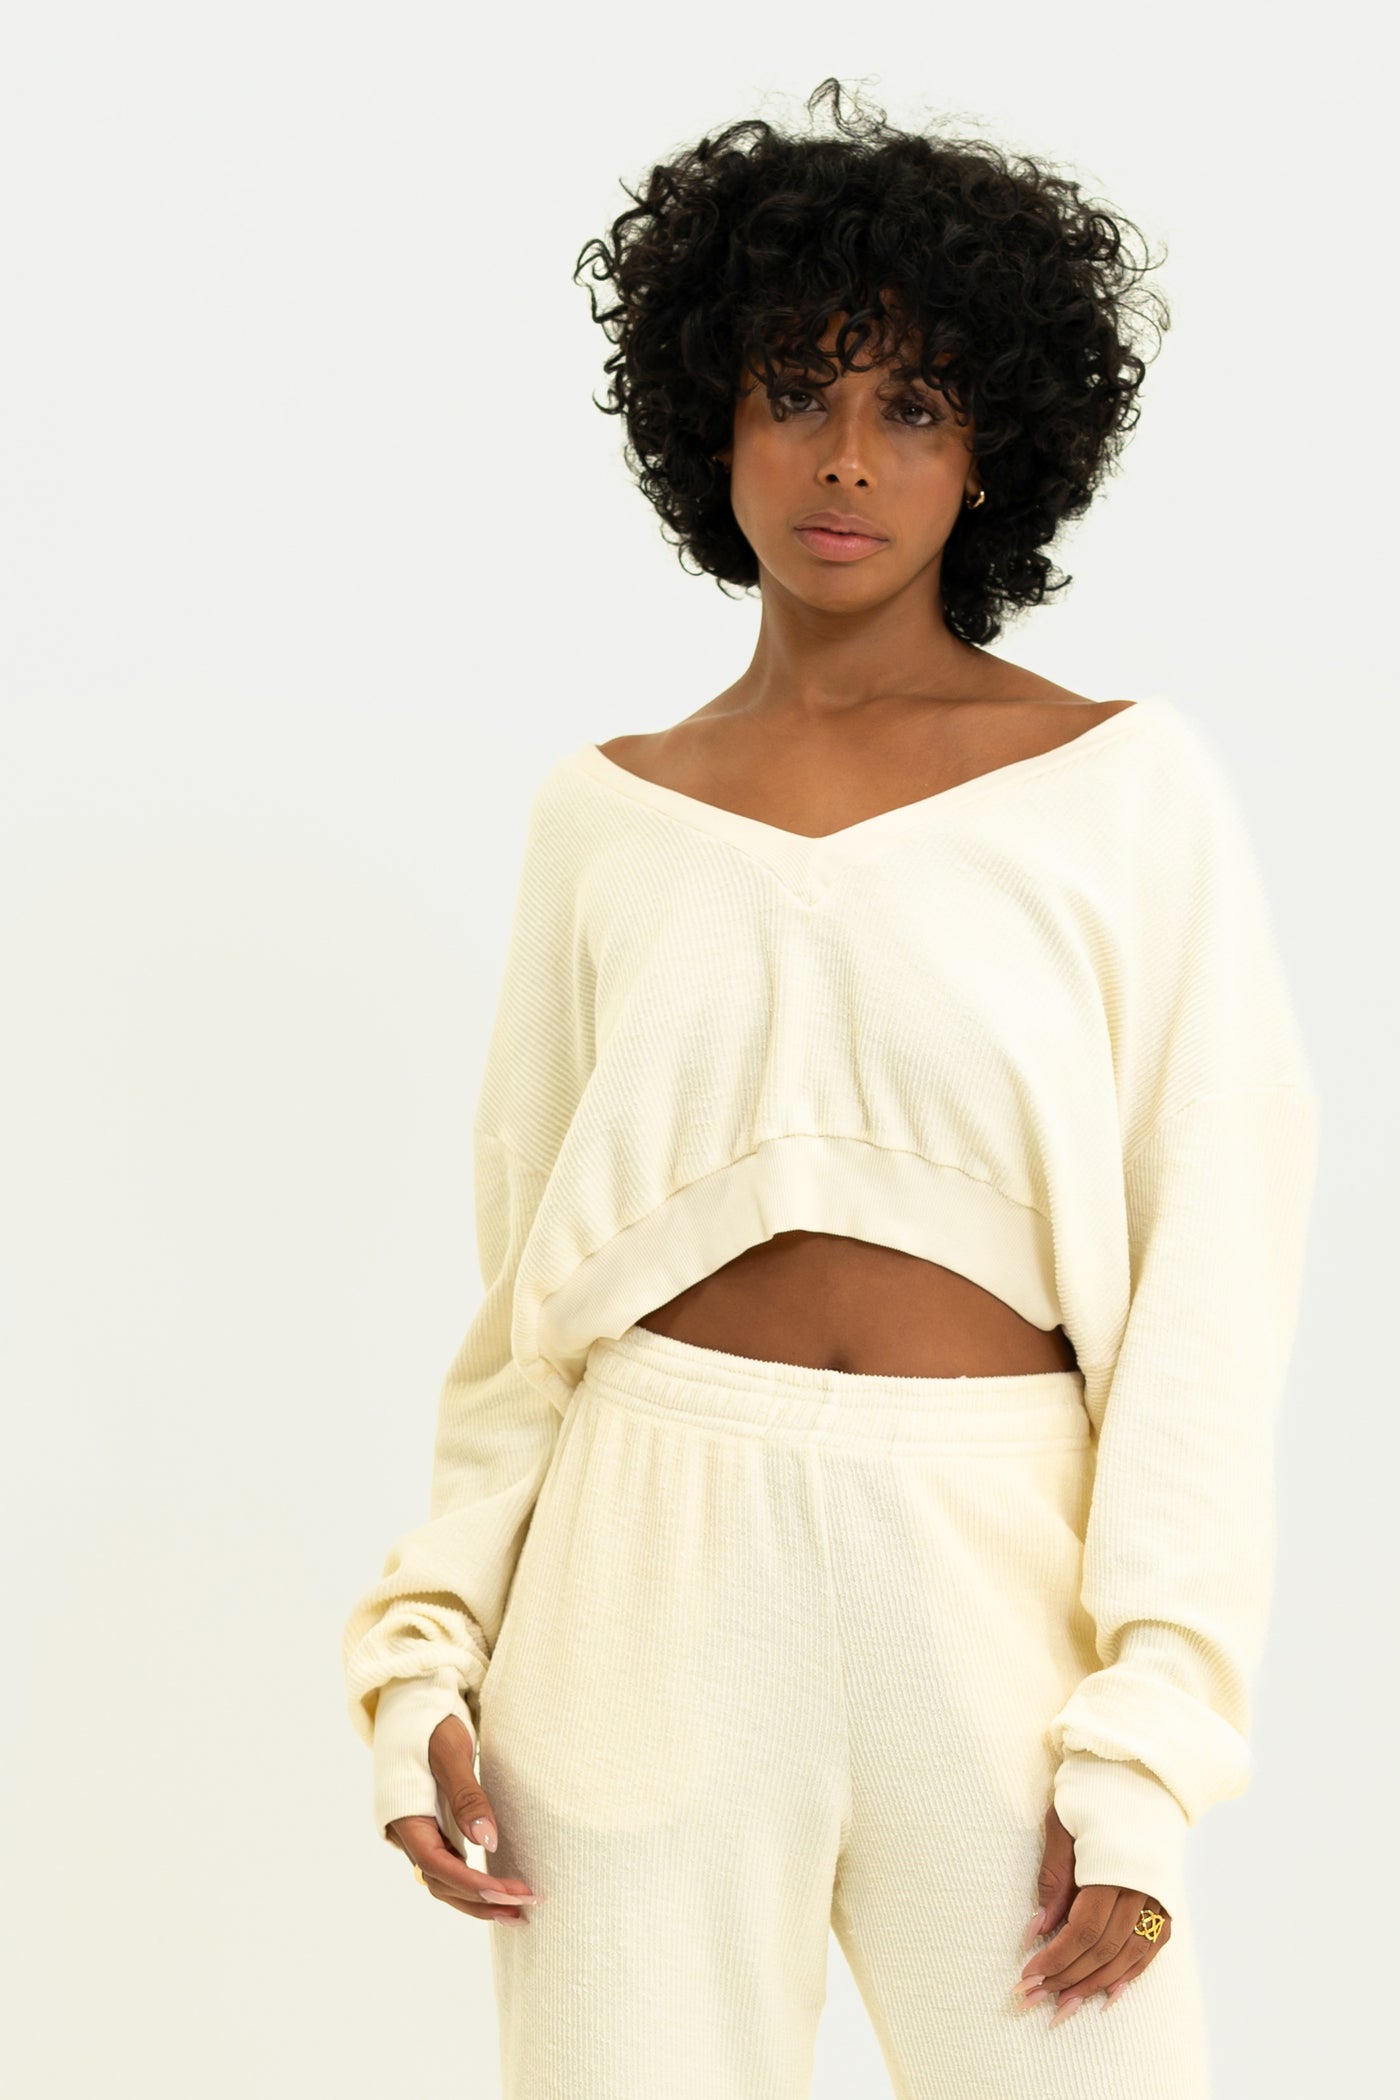 Winter White Aspen Pullover with a deep V-neck, in luxurious corded terry fabric, offering a soft touch and elegant style.